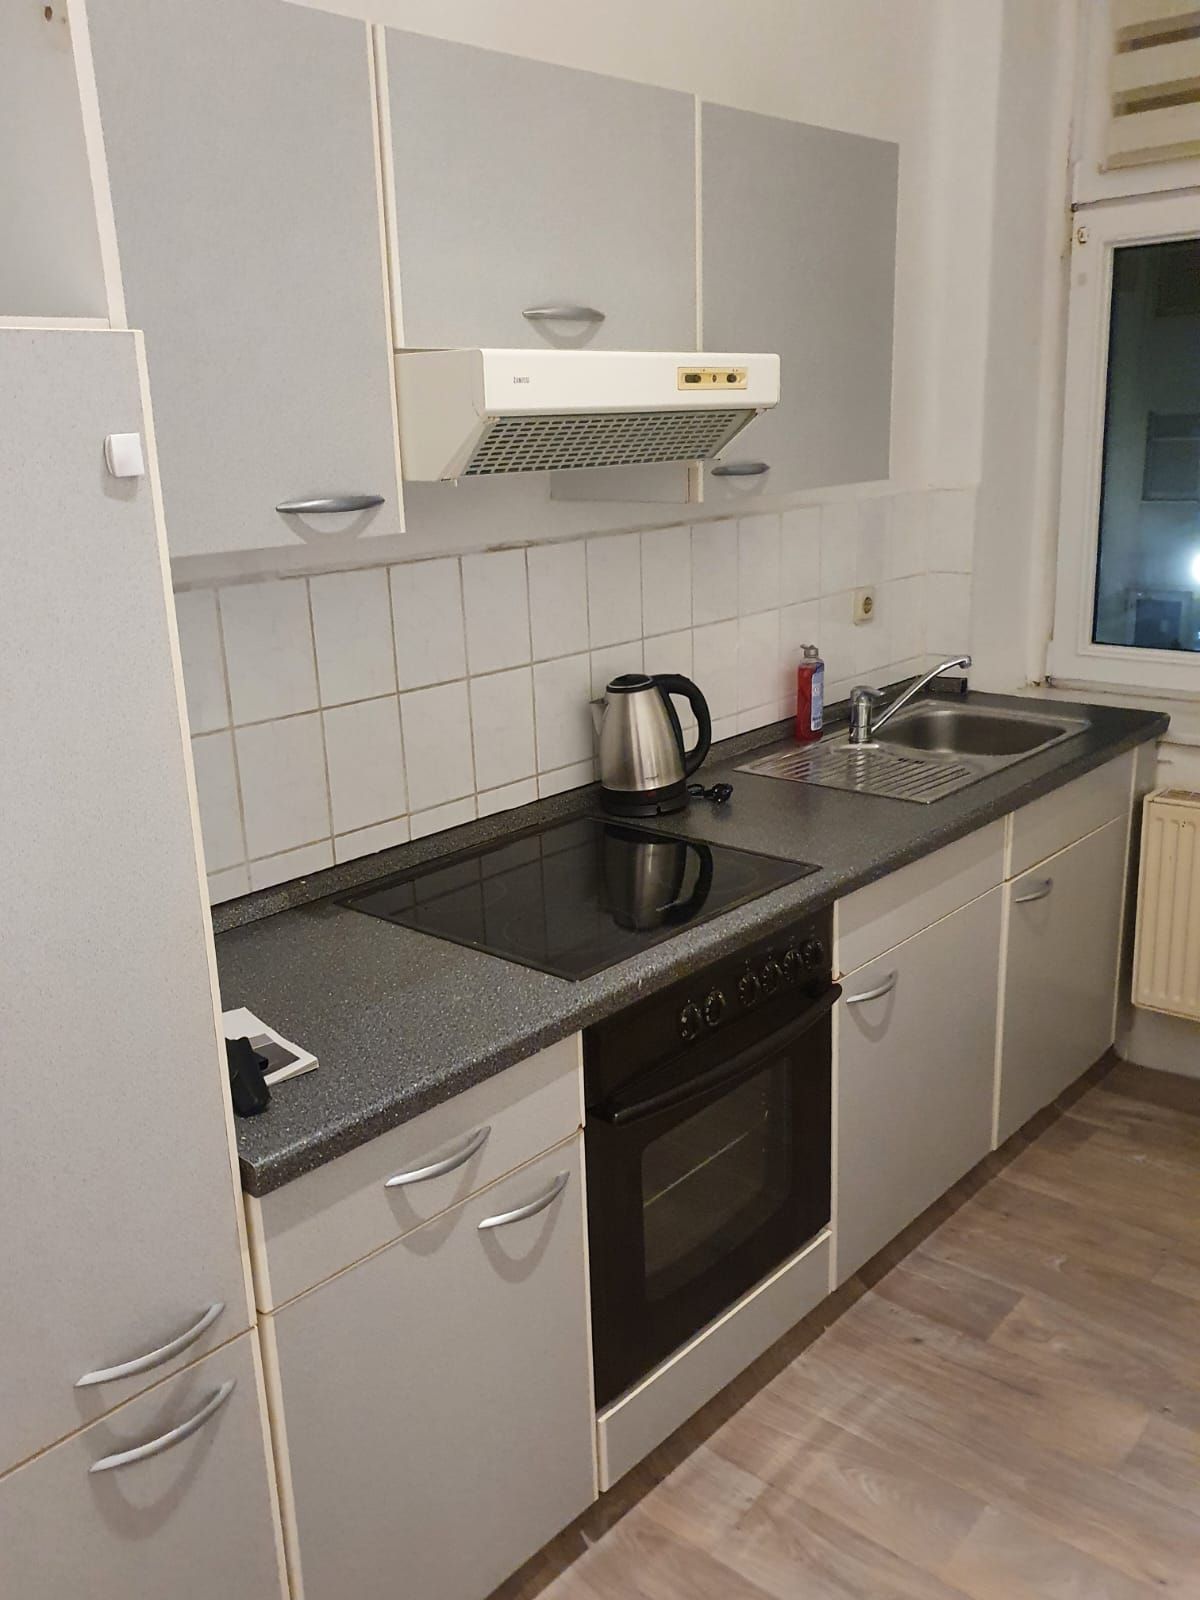 Newly renovated apartment in Magdeburg